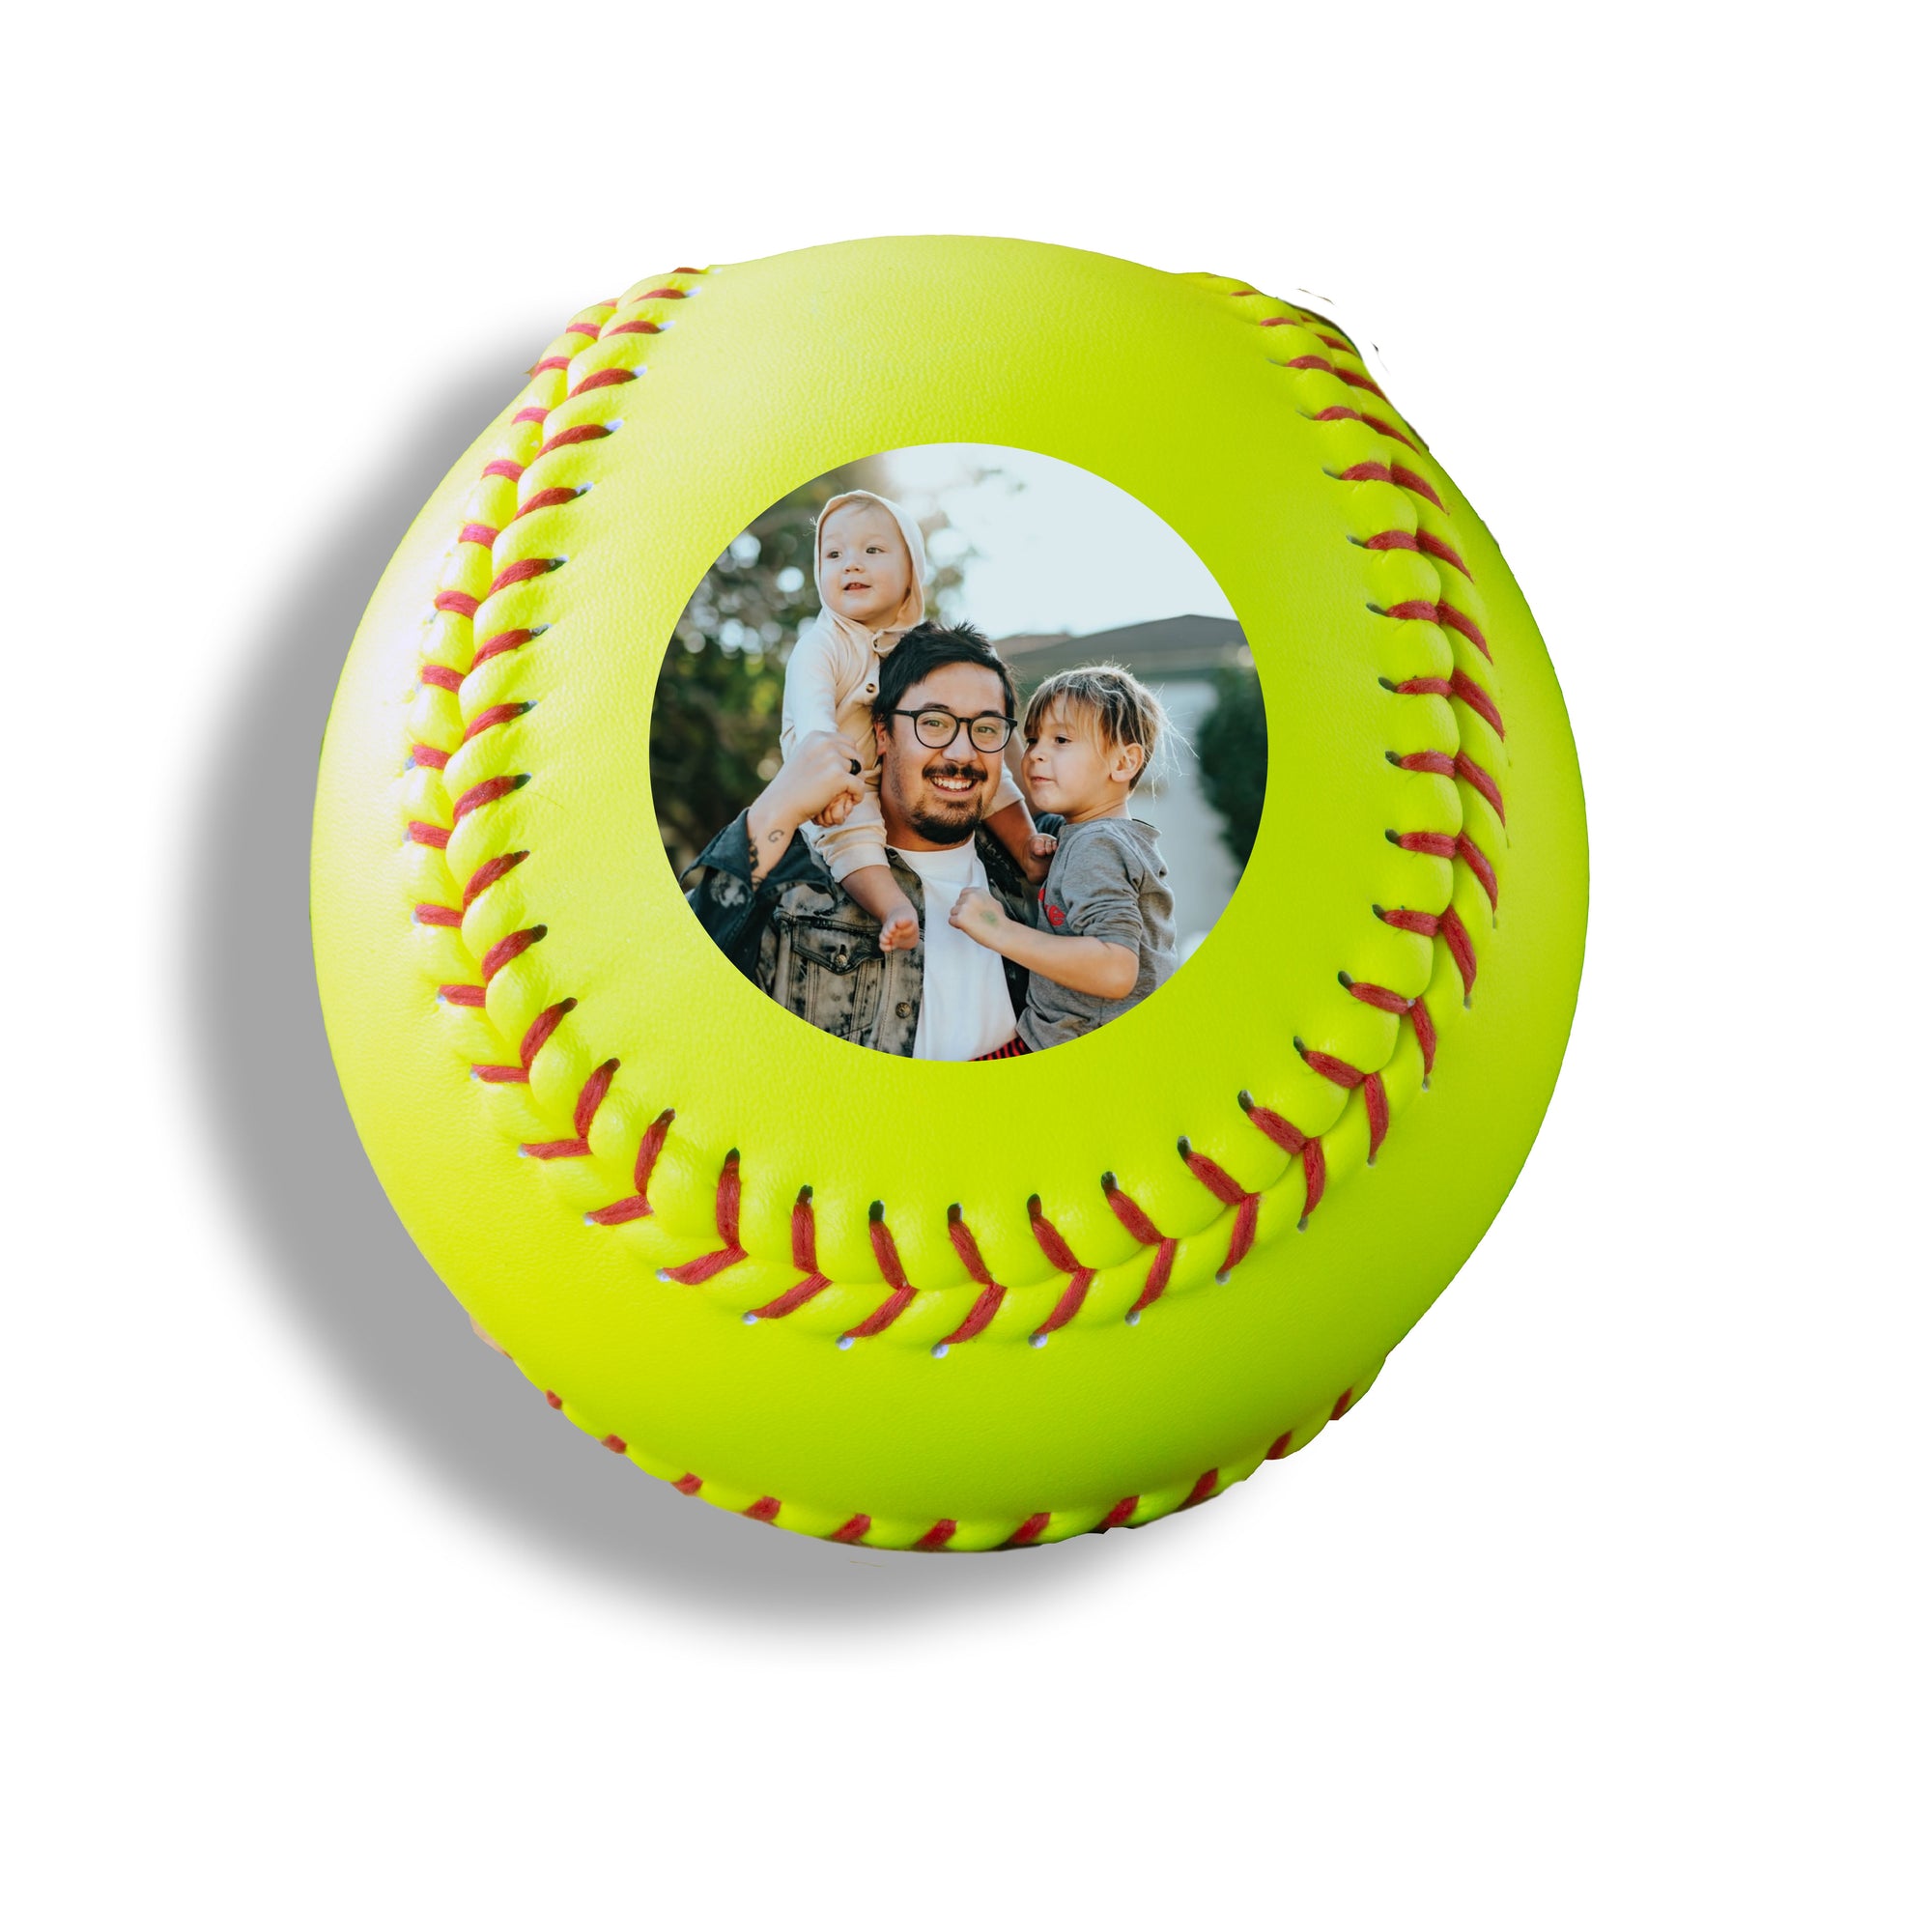 Happy Father's Day, Printed Softball